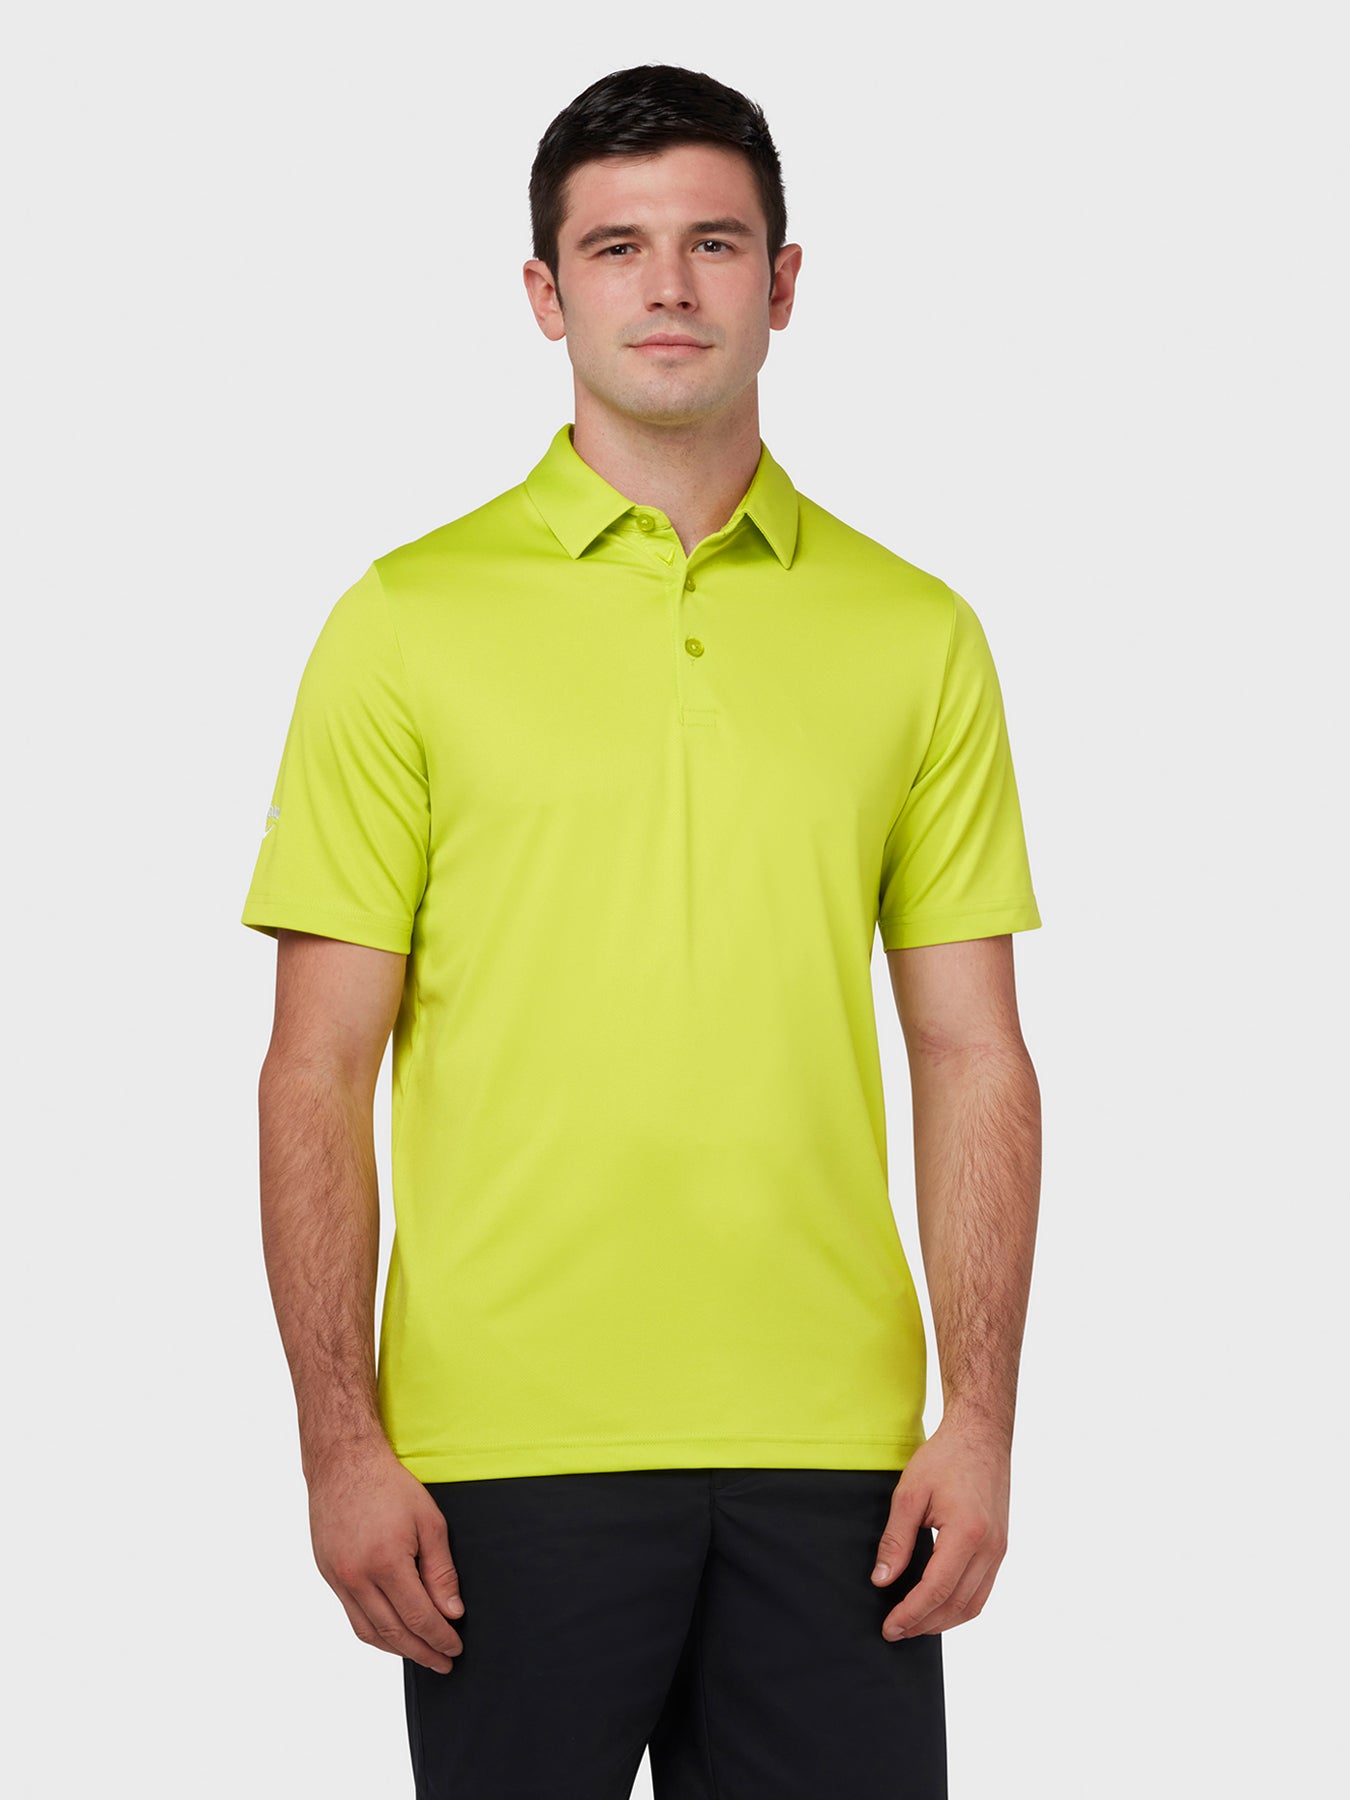 View Swing Tech Tour Polo In Surreal Green Surreal Green XL information